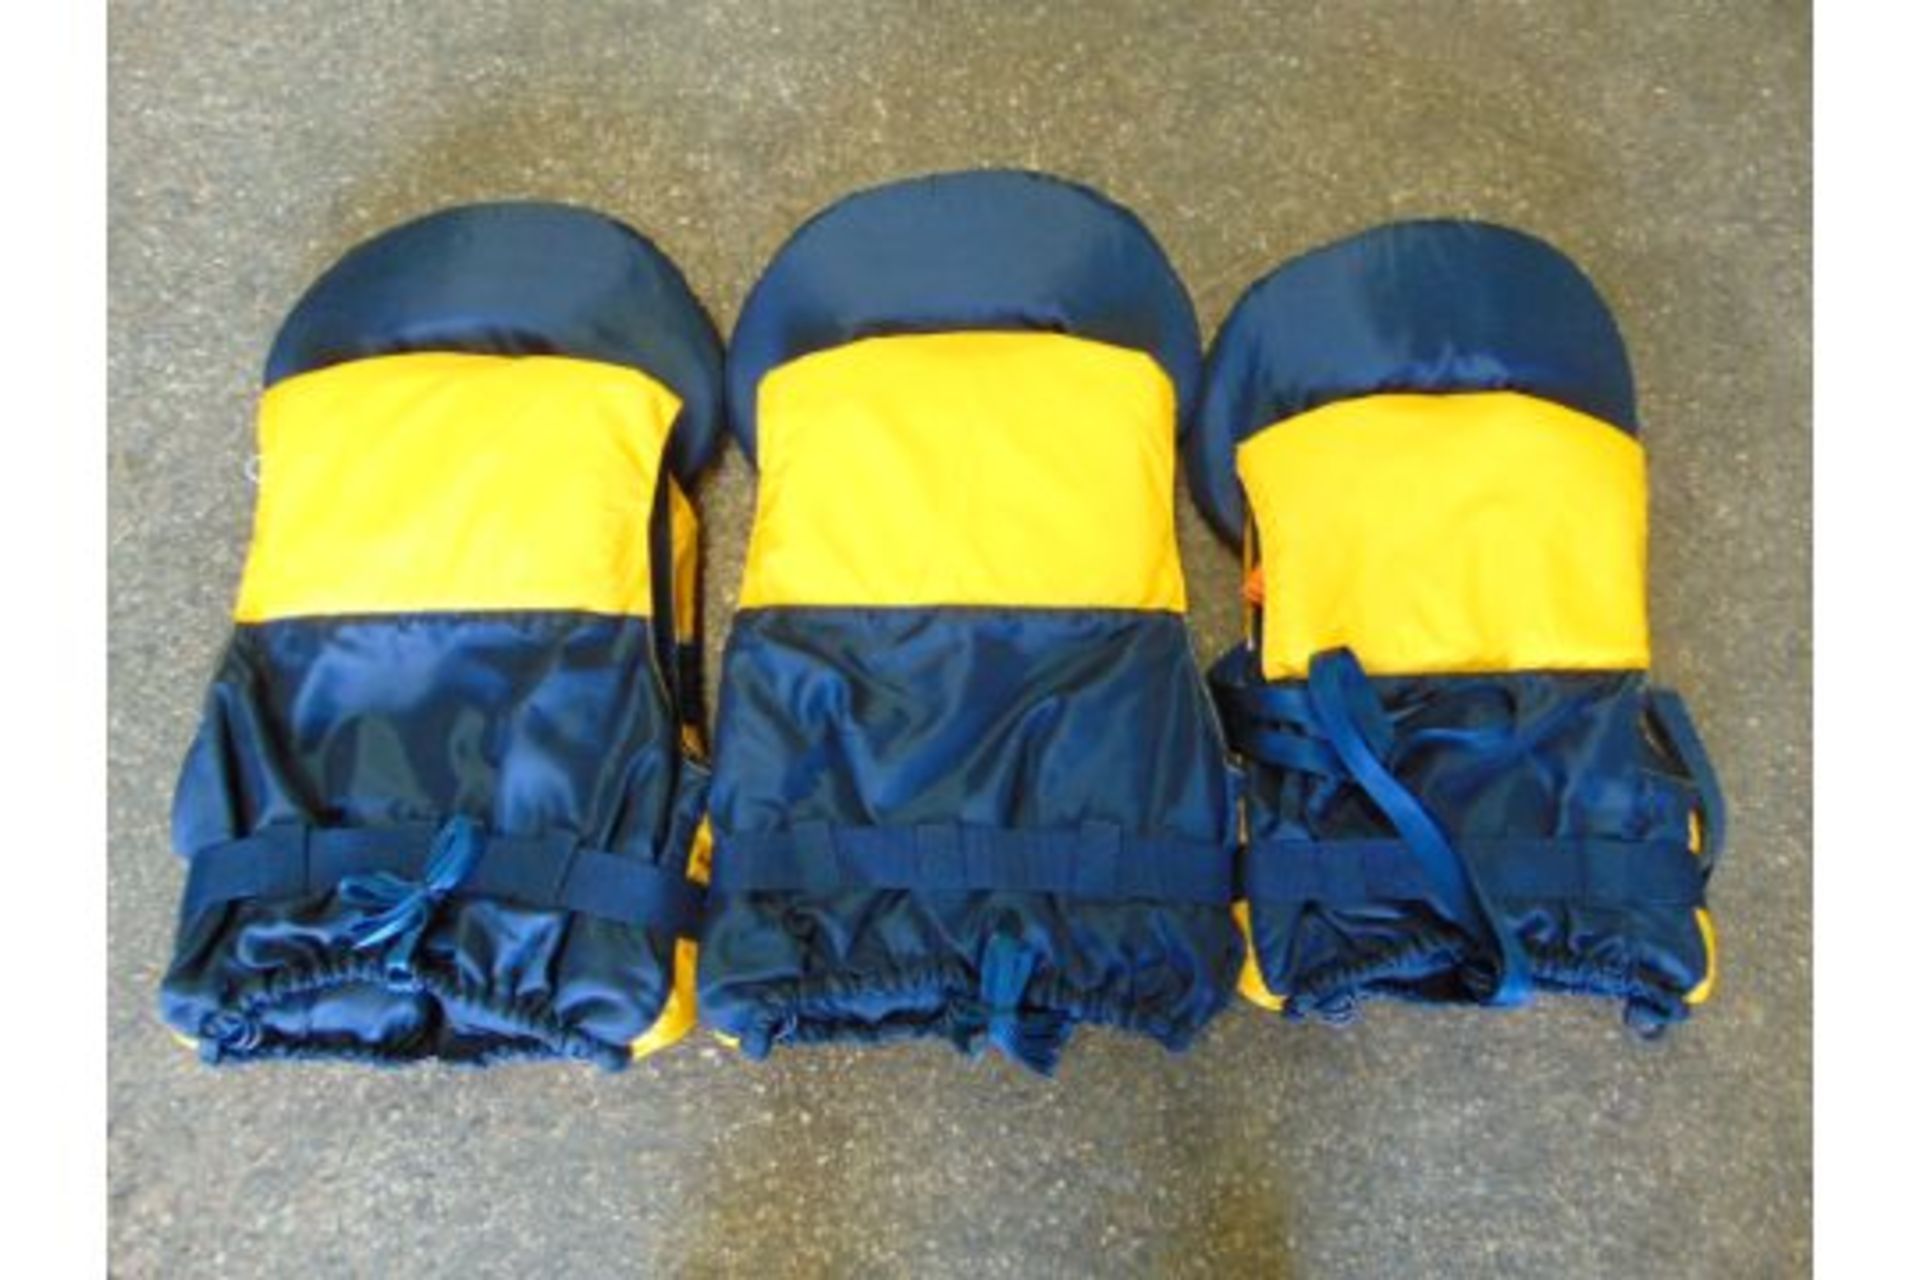 3 x Crewsaver Spiral 100N Buoyancy Aid - PFD Personal Floatation Device - Image 3 of 6